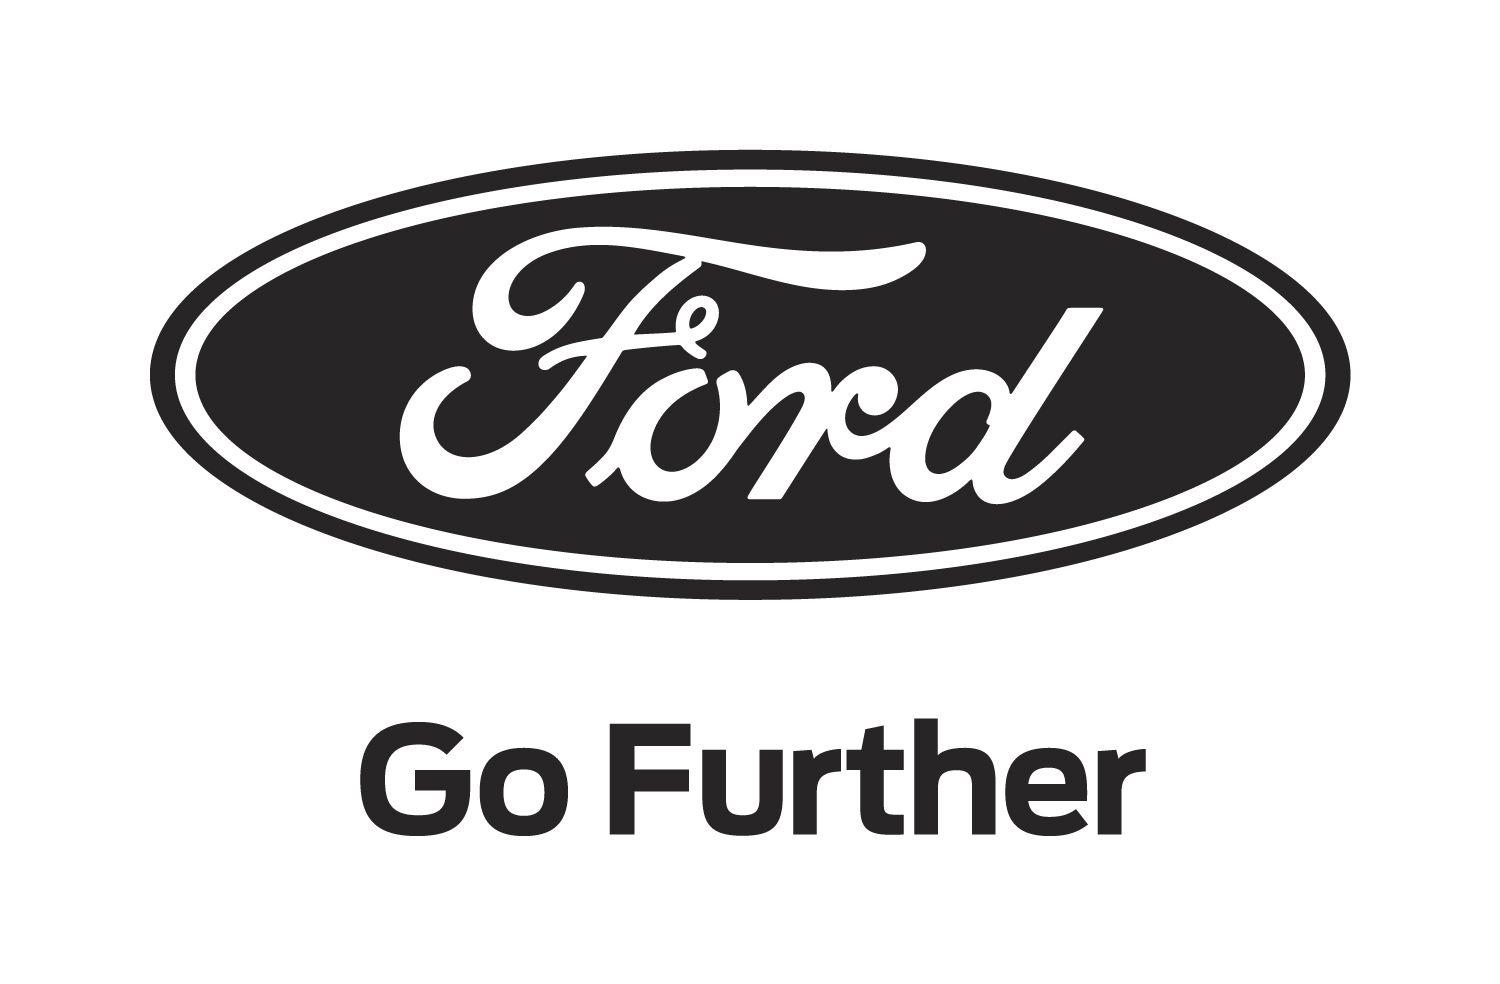 Black and White Ford Racing Logo - John Andrew Ford - John Andrew | New, Used and Demonstrators Ford ...